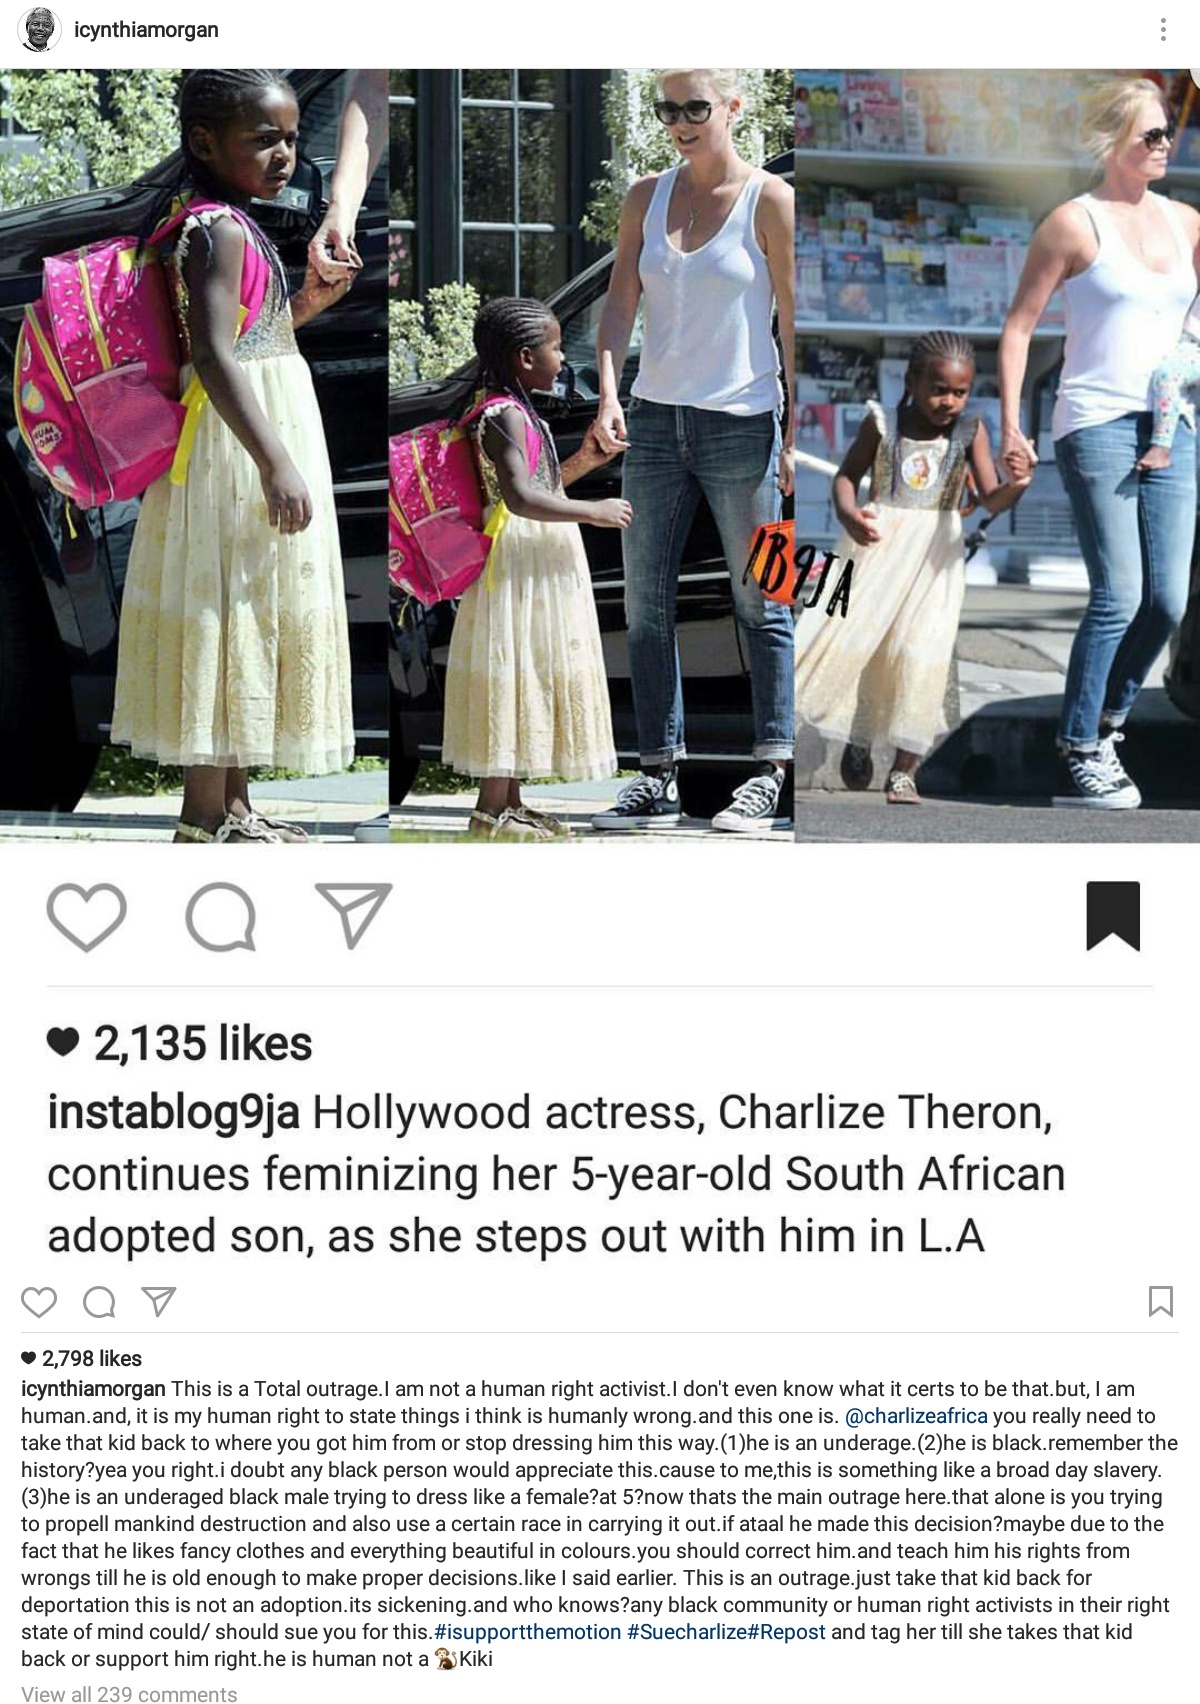 Cynthia Morgan Unleashed Anger On Hollywood Star Charlize Theron For Dressing Her Adopted 5-Year-Old As A Girl